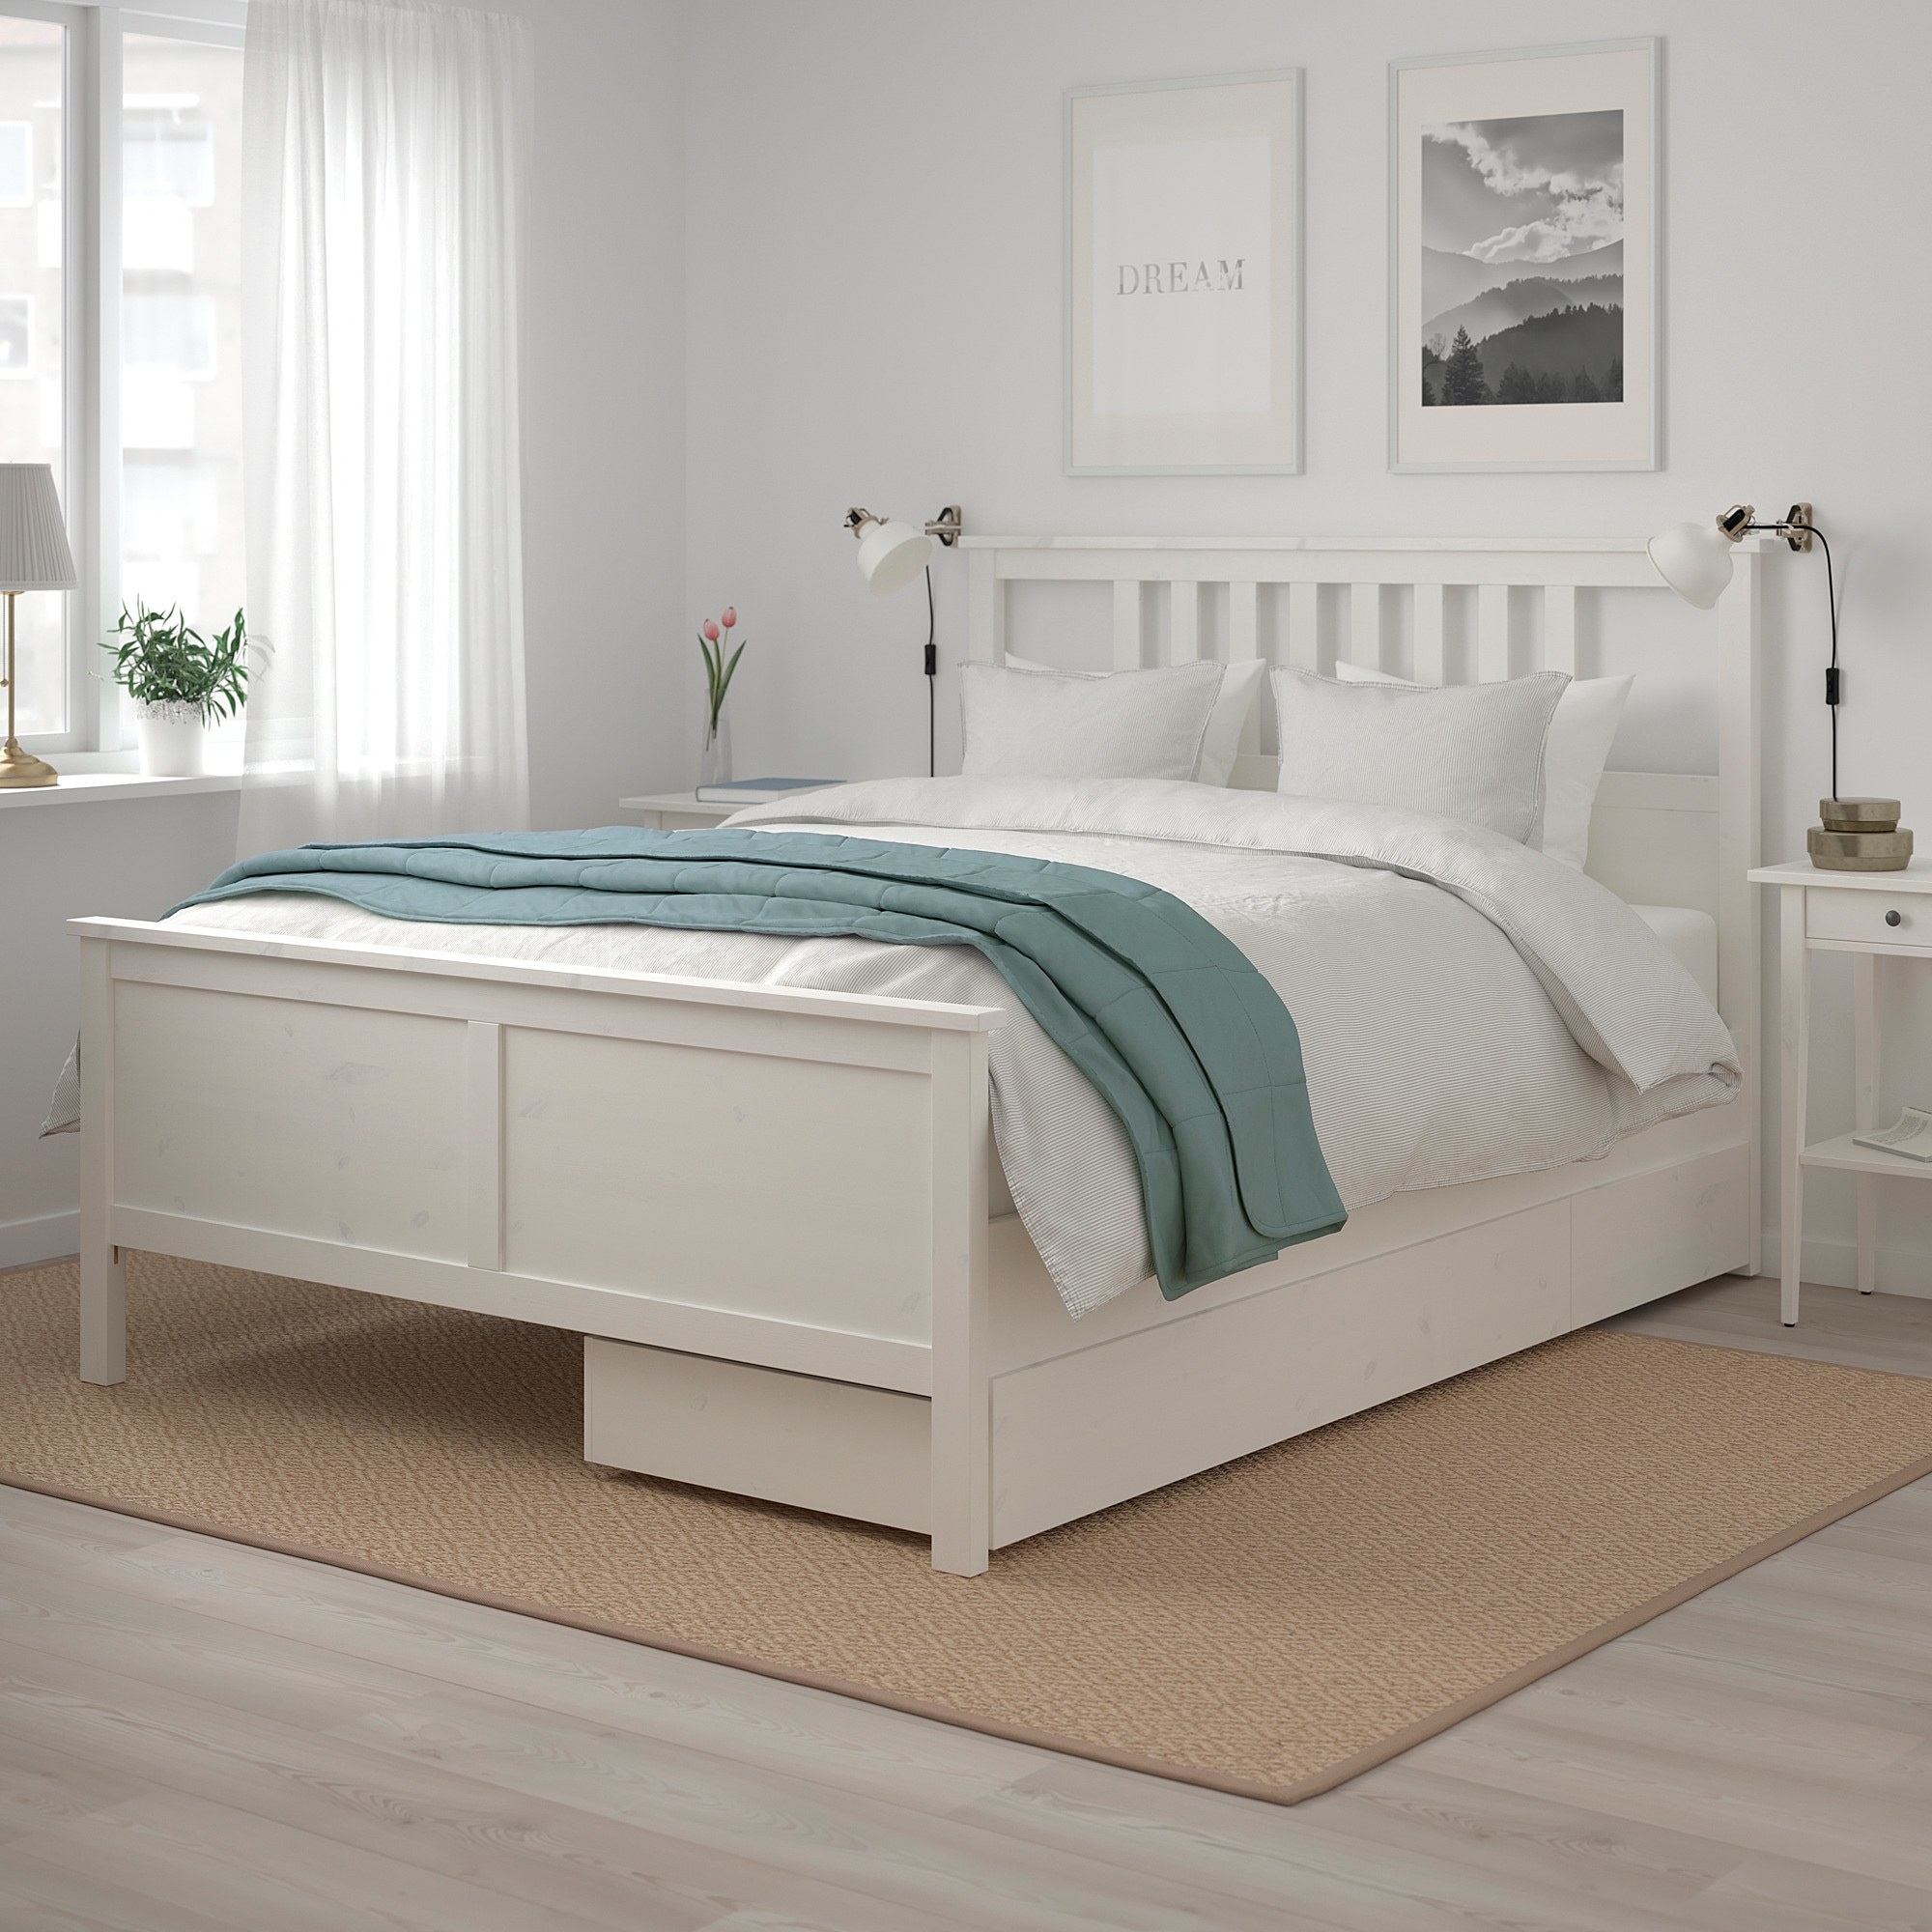 27 Bed Frames That Only Look, Ikea California King Bed Frame With Drawers